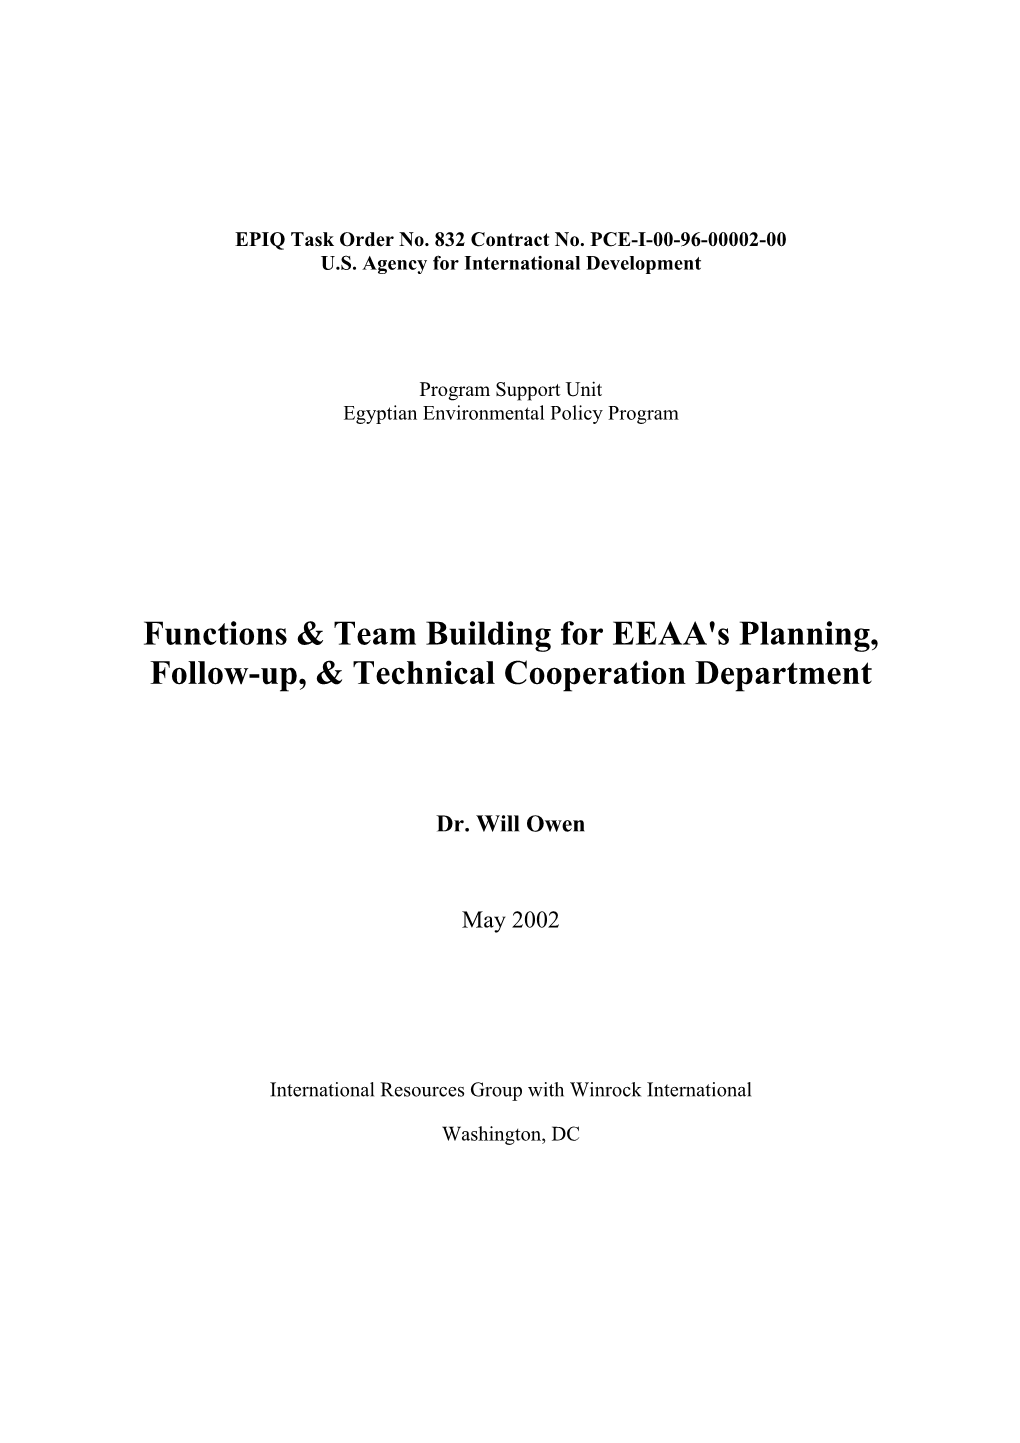 Functions & Team Building for EEAA's Planning, Follow-Up, & Technical Cooperation Department